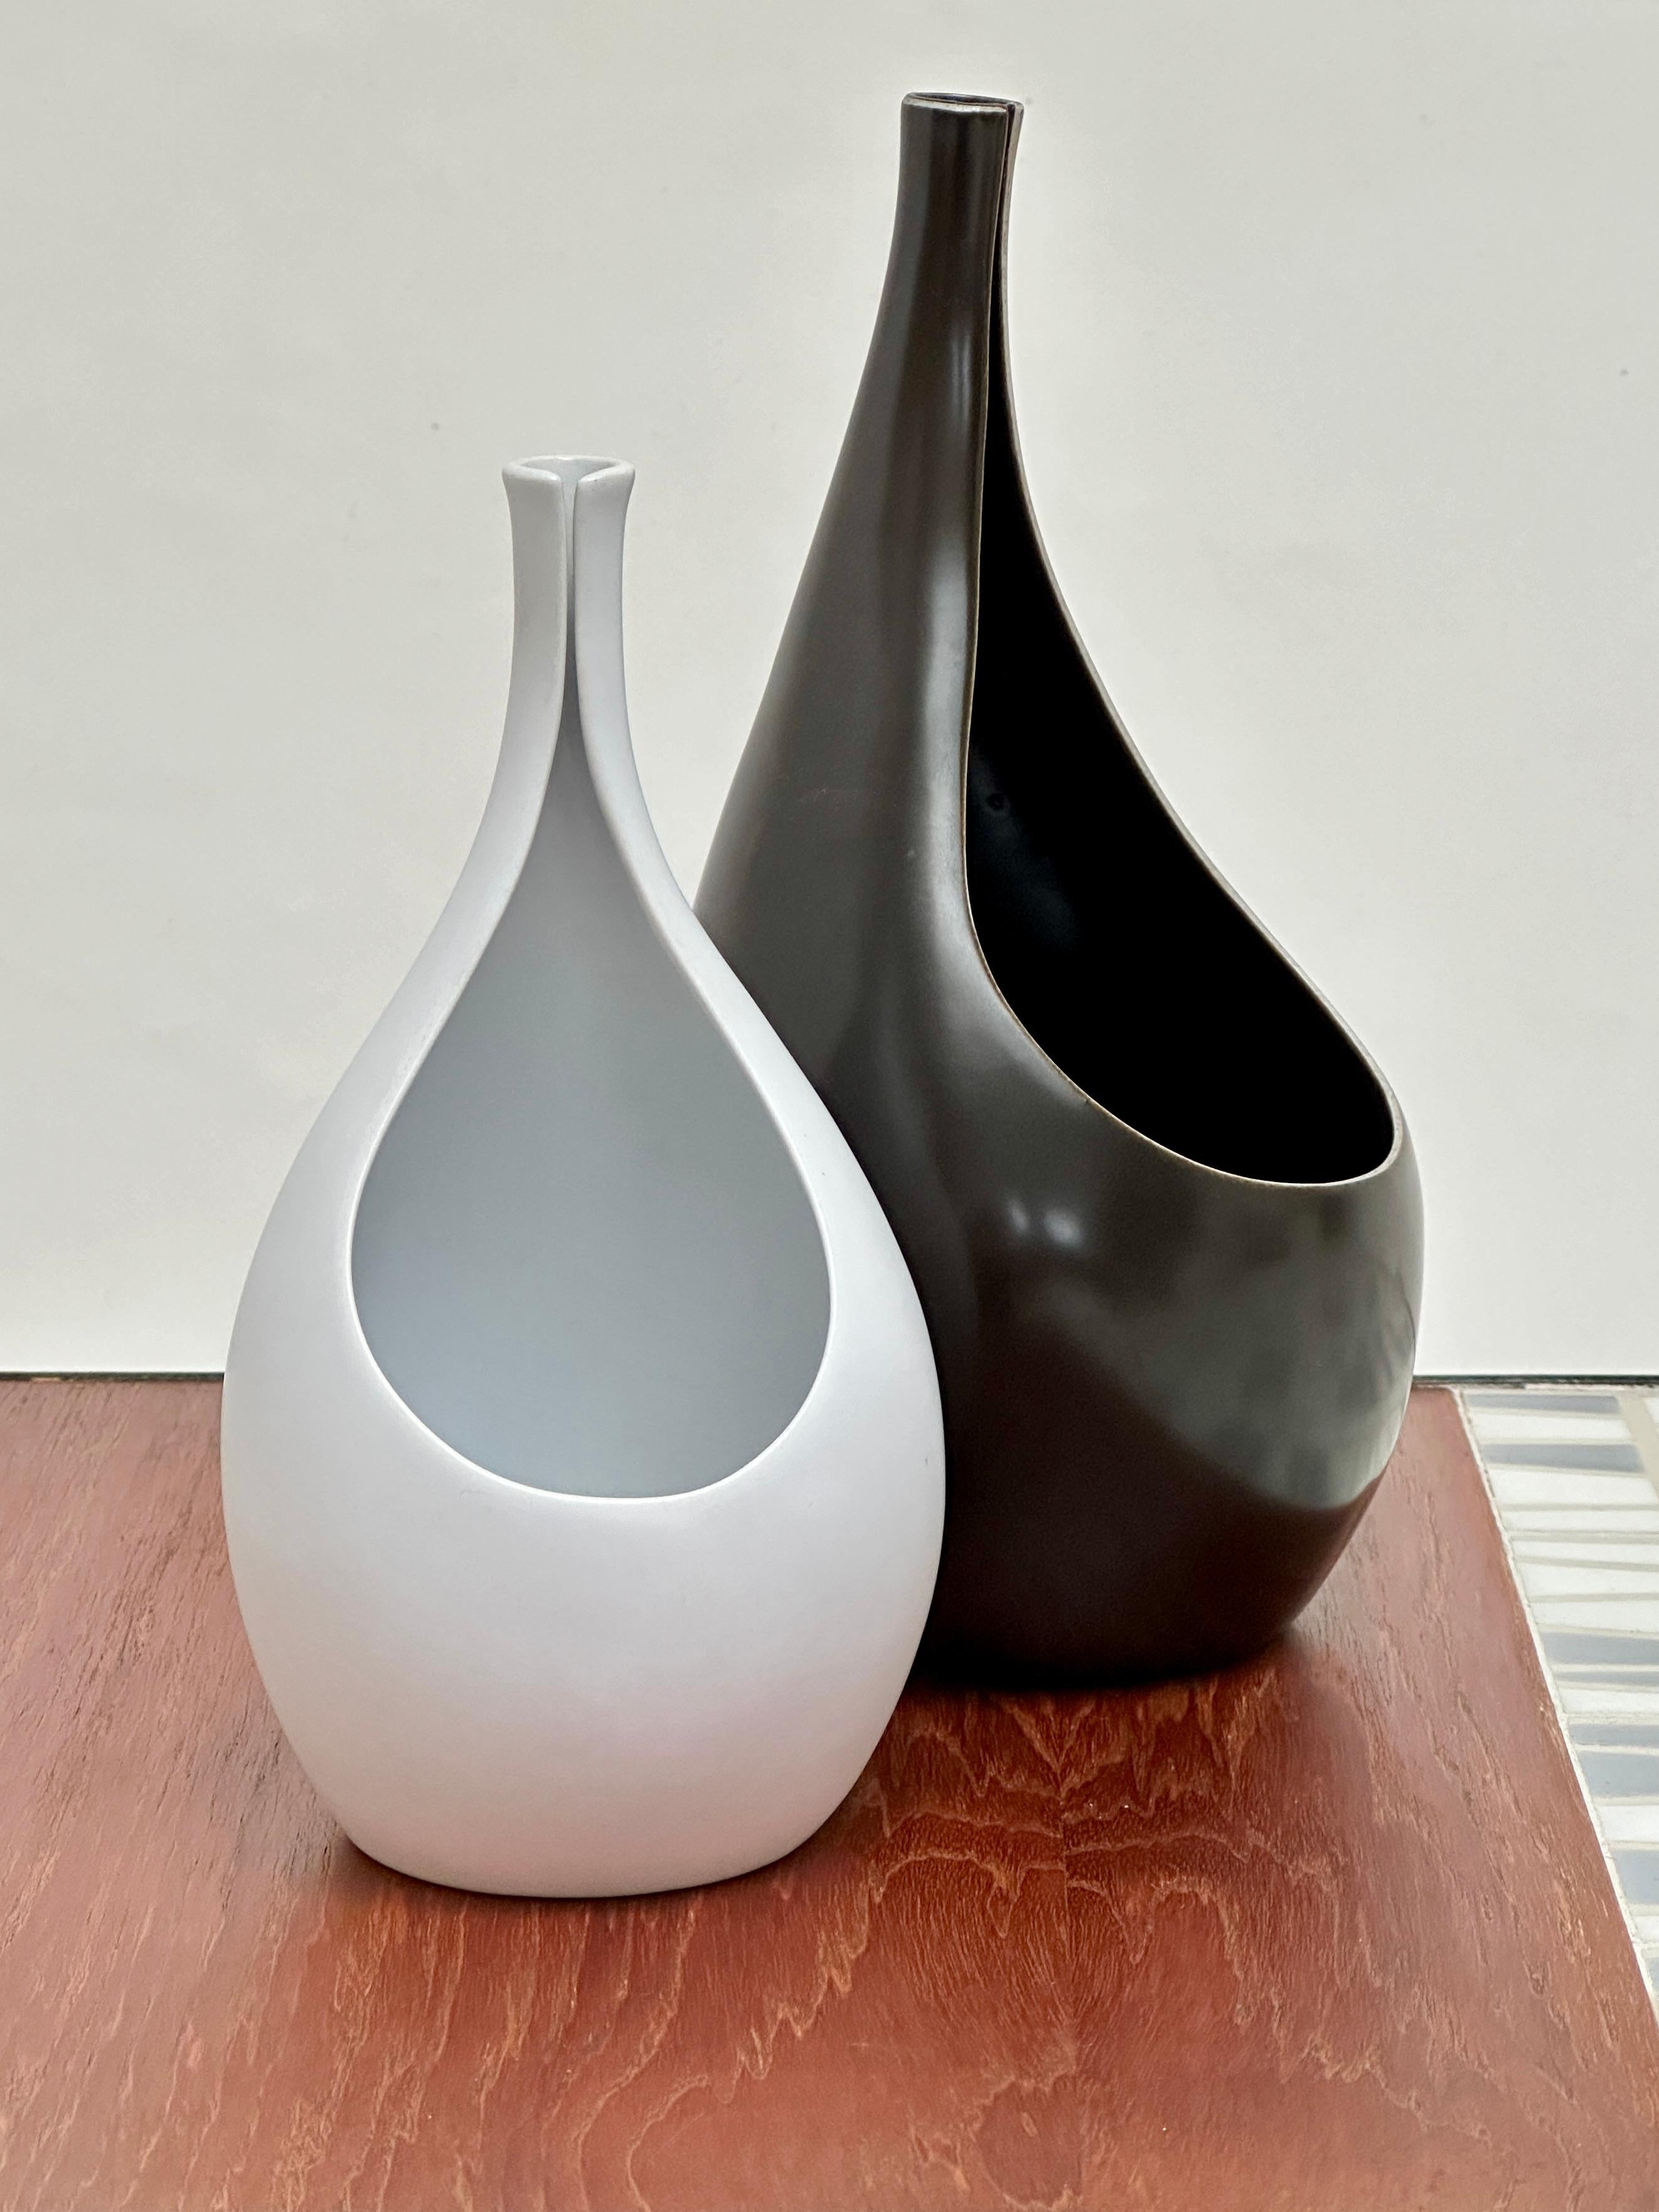 2 vases from the Pungo range created by Stig Lindberg for the Swedish manufacturer Gustavsberg in 1953.

Fine stoneware with matt white glaze for one and satin black called “Carrara” for the other.

Manufacture stamp on the back and, quite